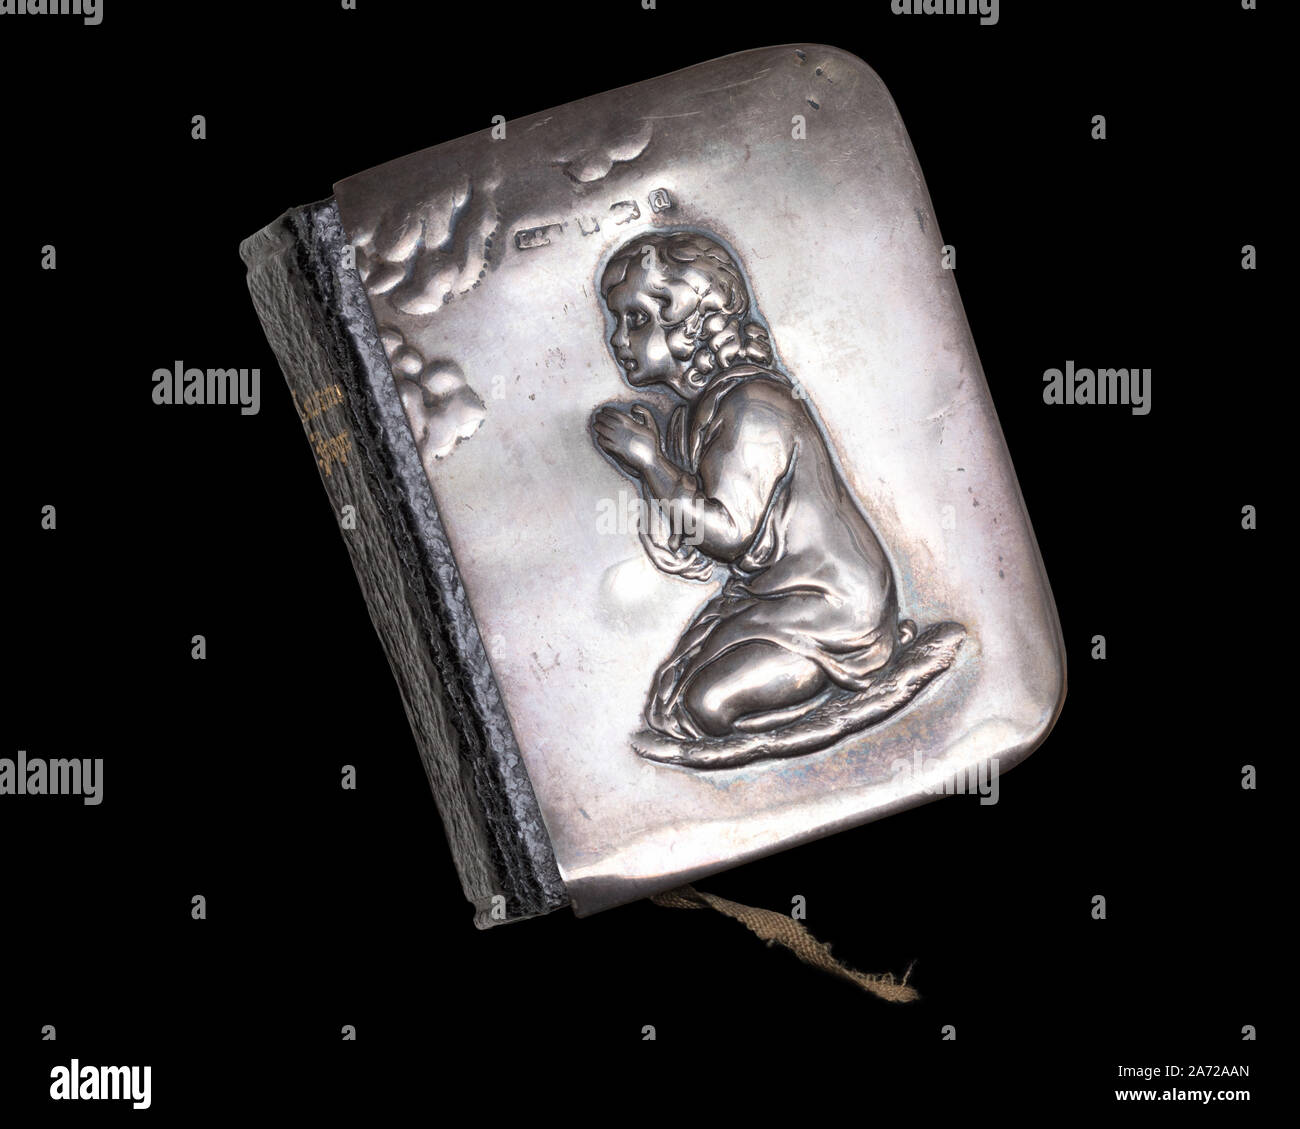 Miniature Edwardian-era Book of Common Prayer with a silver cover depicting a kneeling praying figure in relief, isolated on a black background Stock Photo